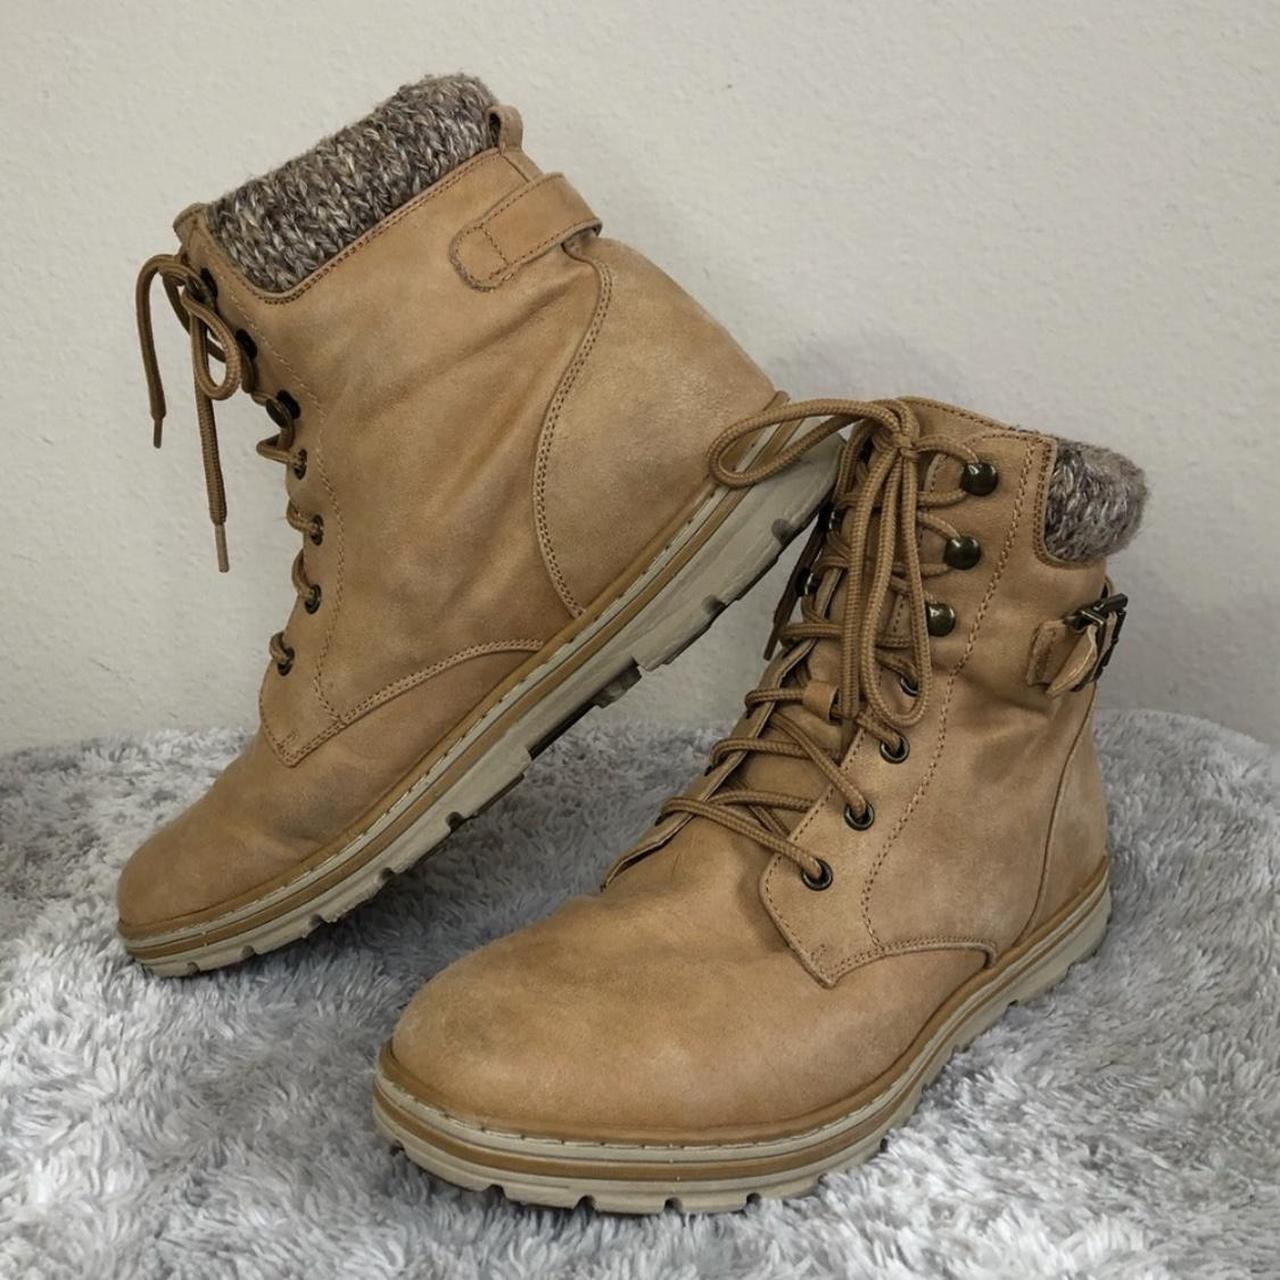 Cliffs by White Mountain Women's Tan and Brown Boots